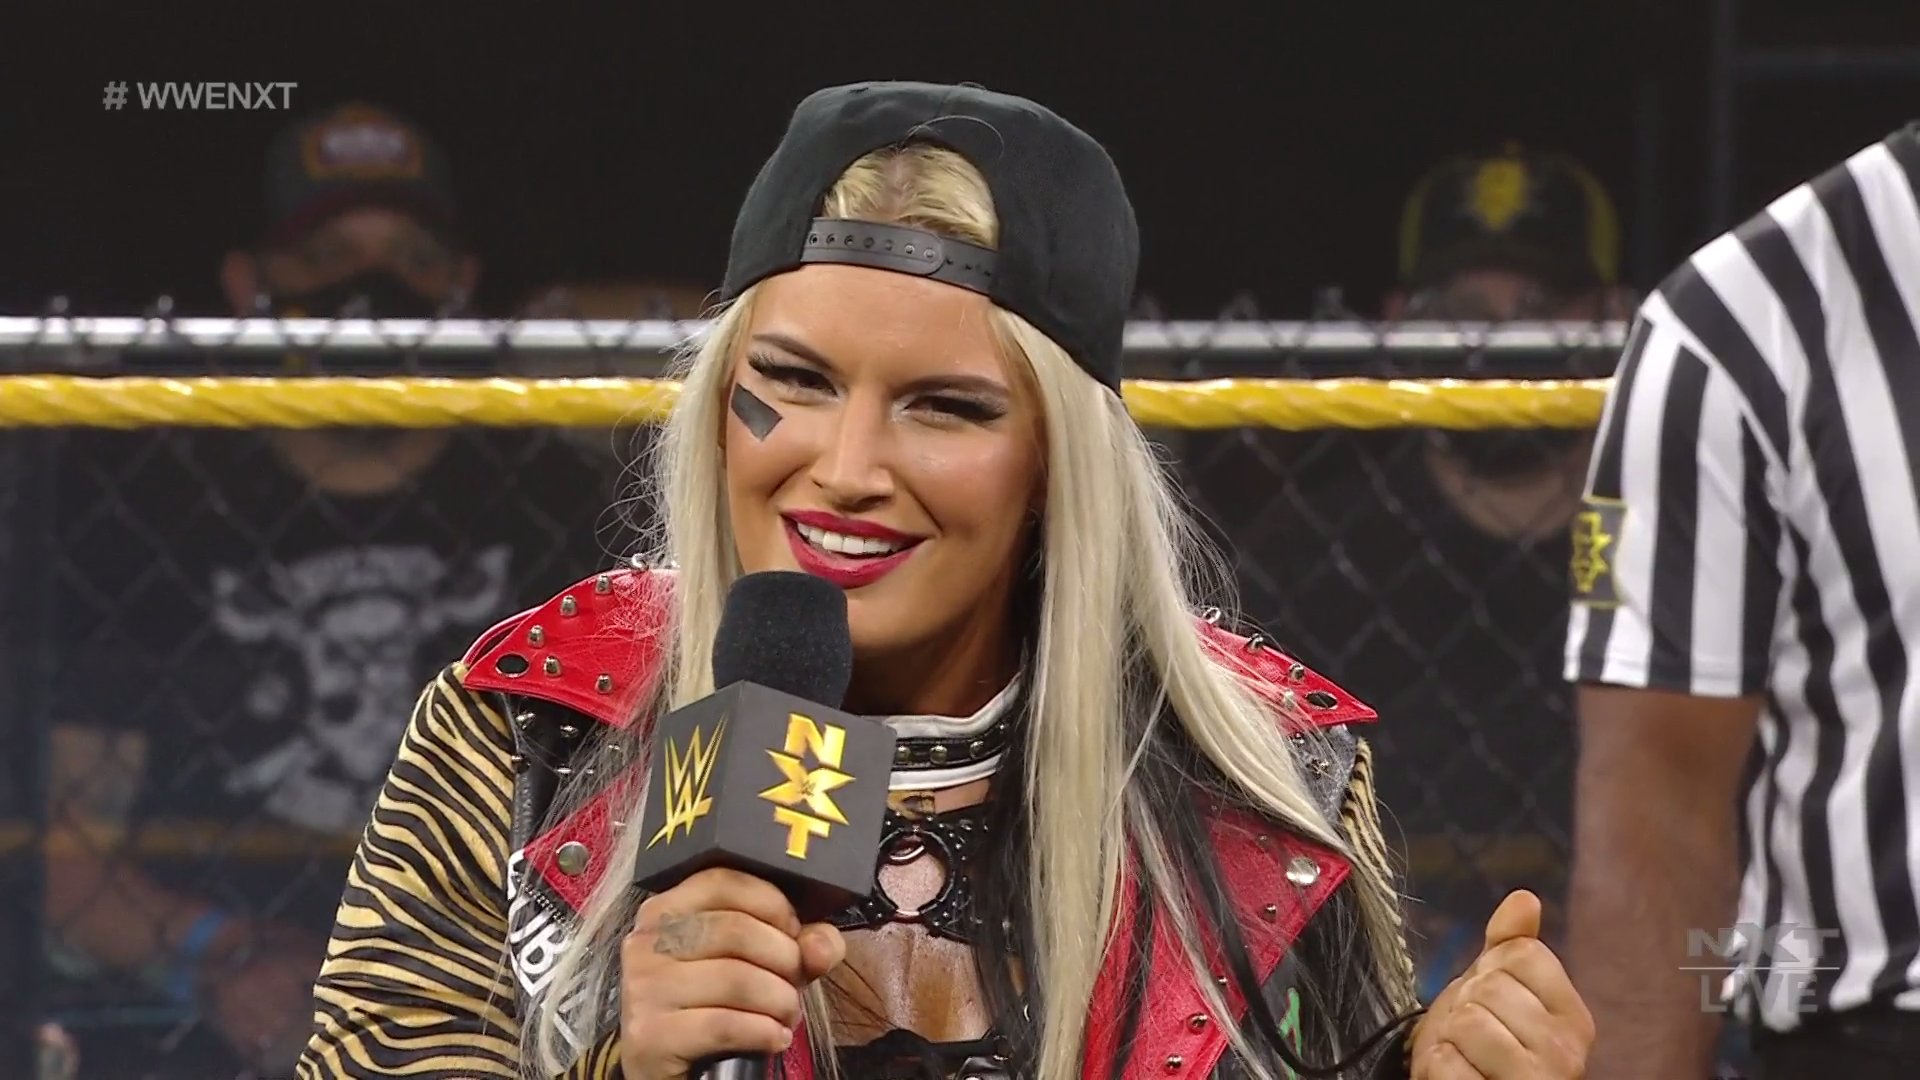 WWE NXT - you owe me a thank you, because at #NXTTakeOver, I made you FAMOUS. Storm #WWENXT